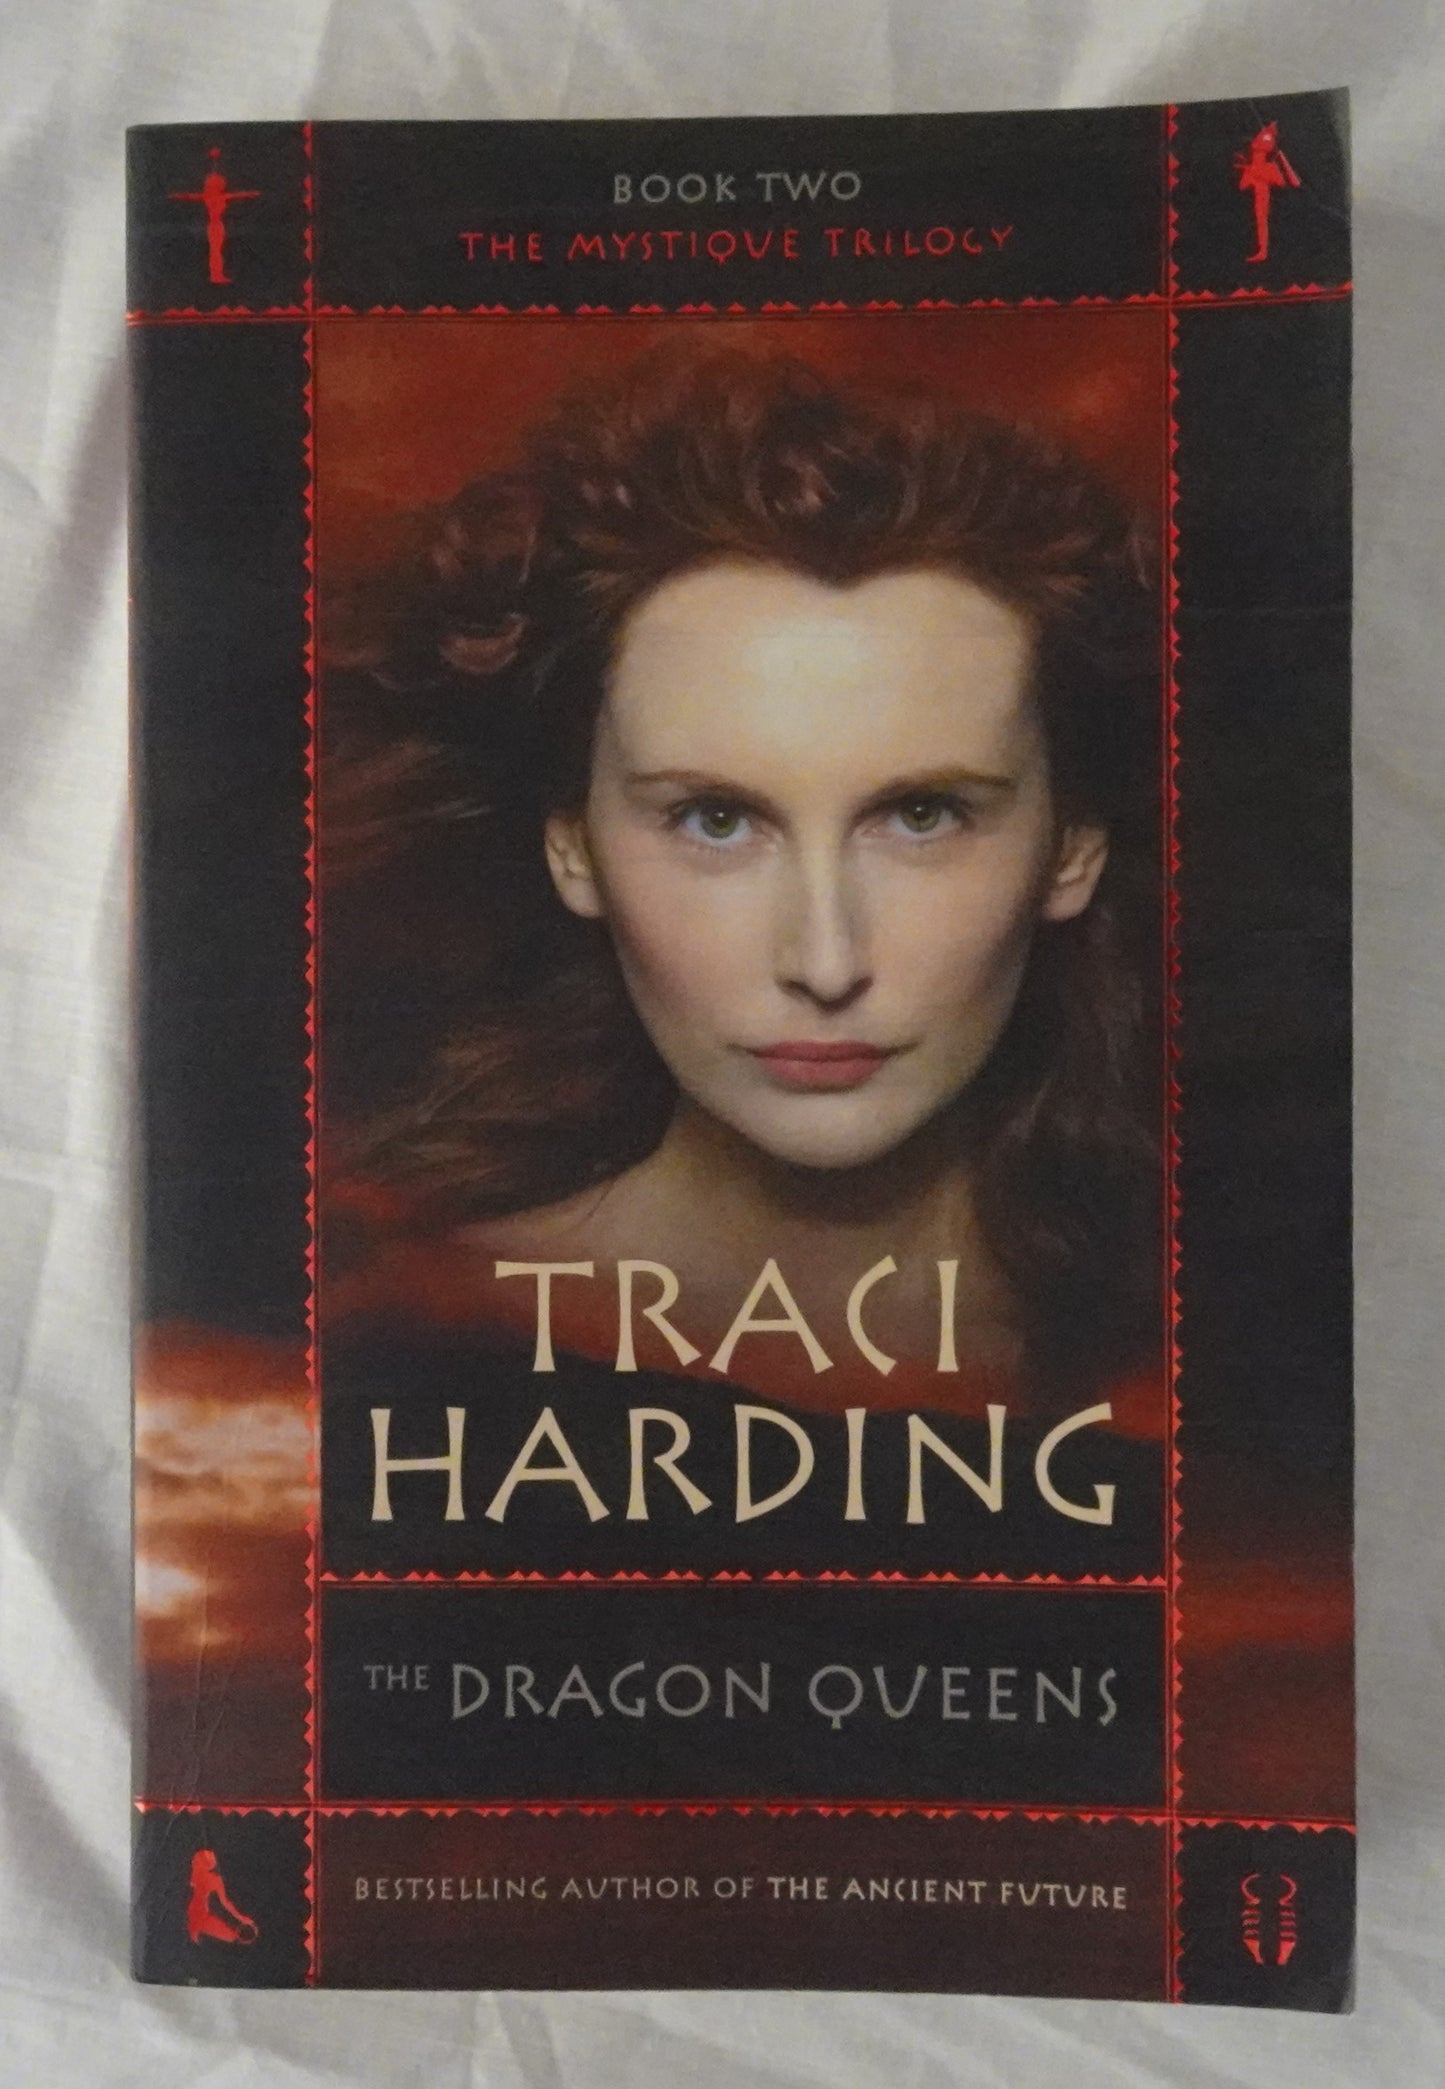 The Dragon Queens  The Mystique Trilogy Book Two  by Traci Harding